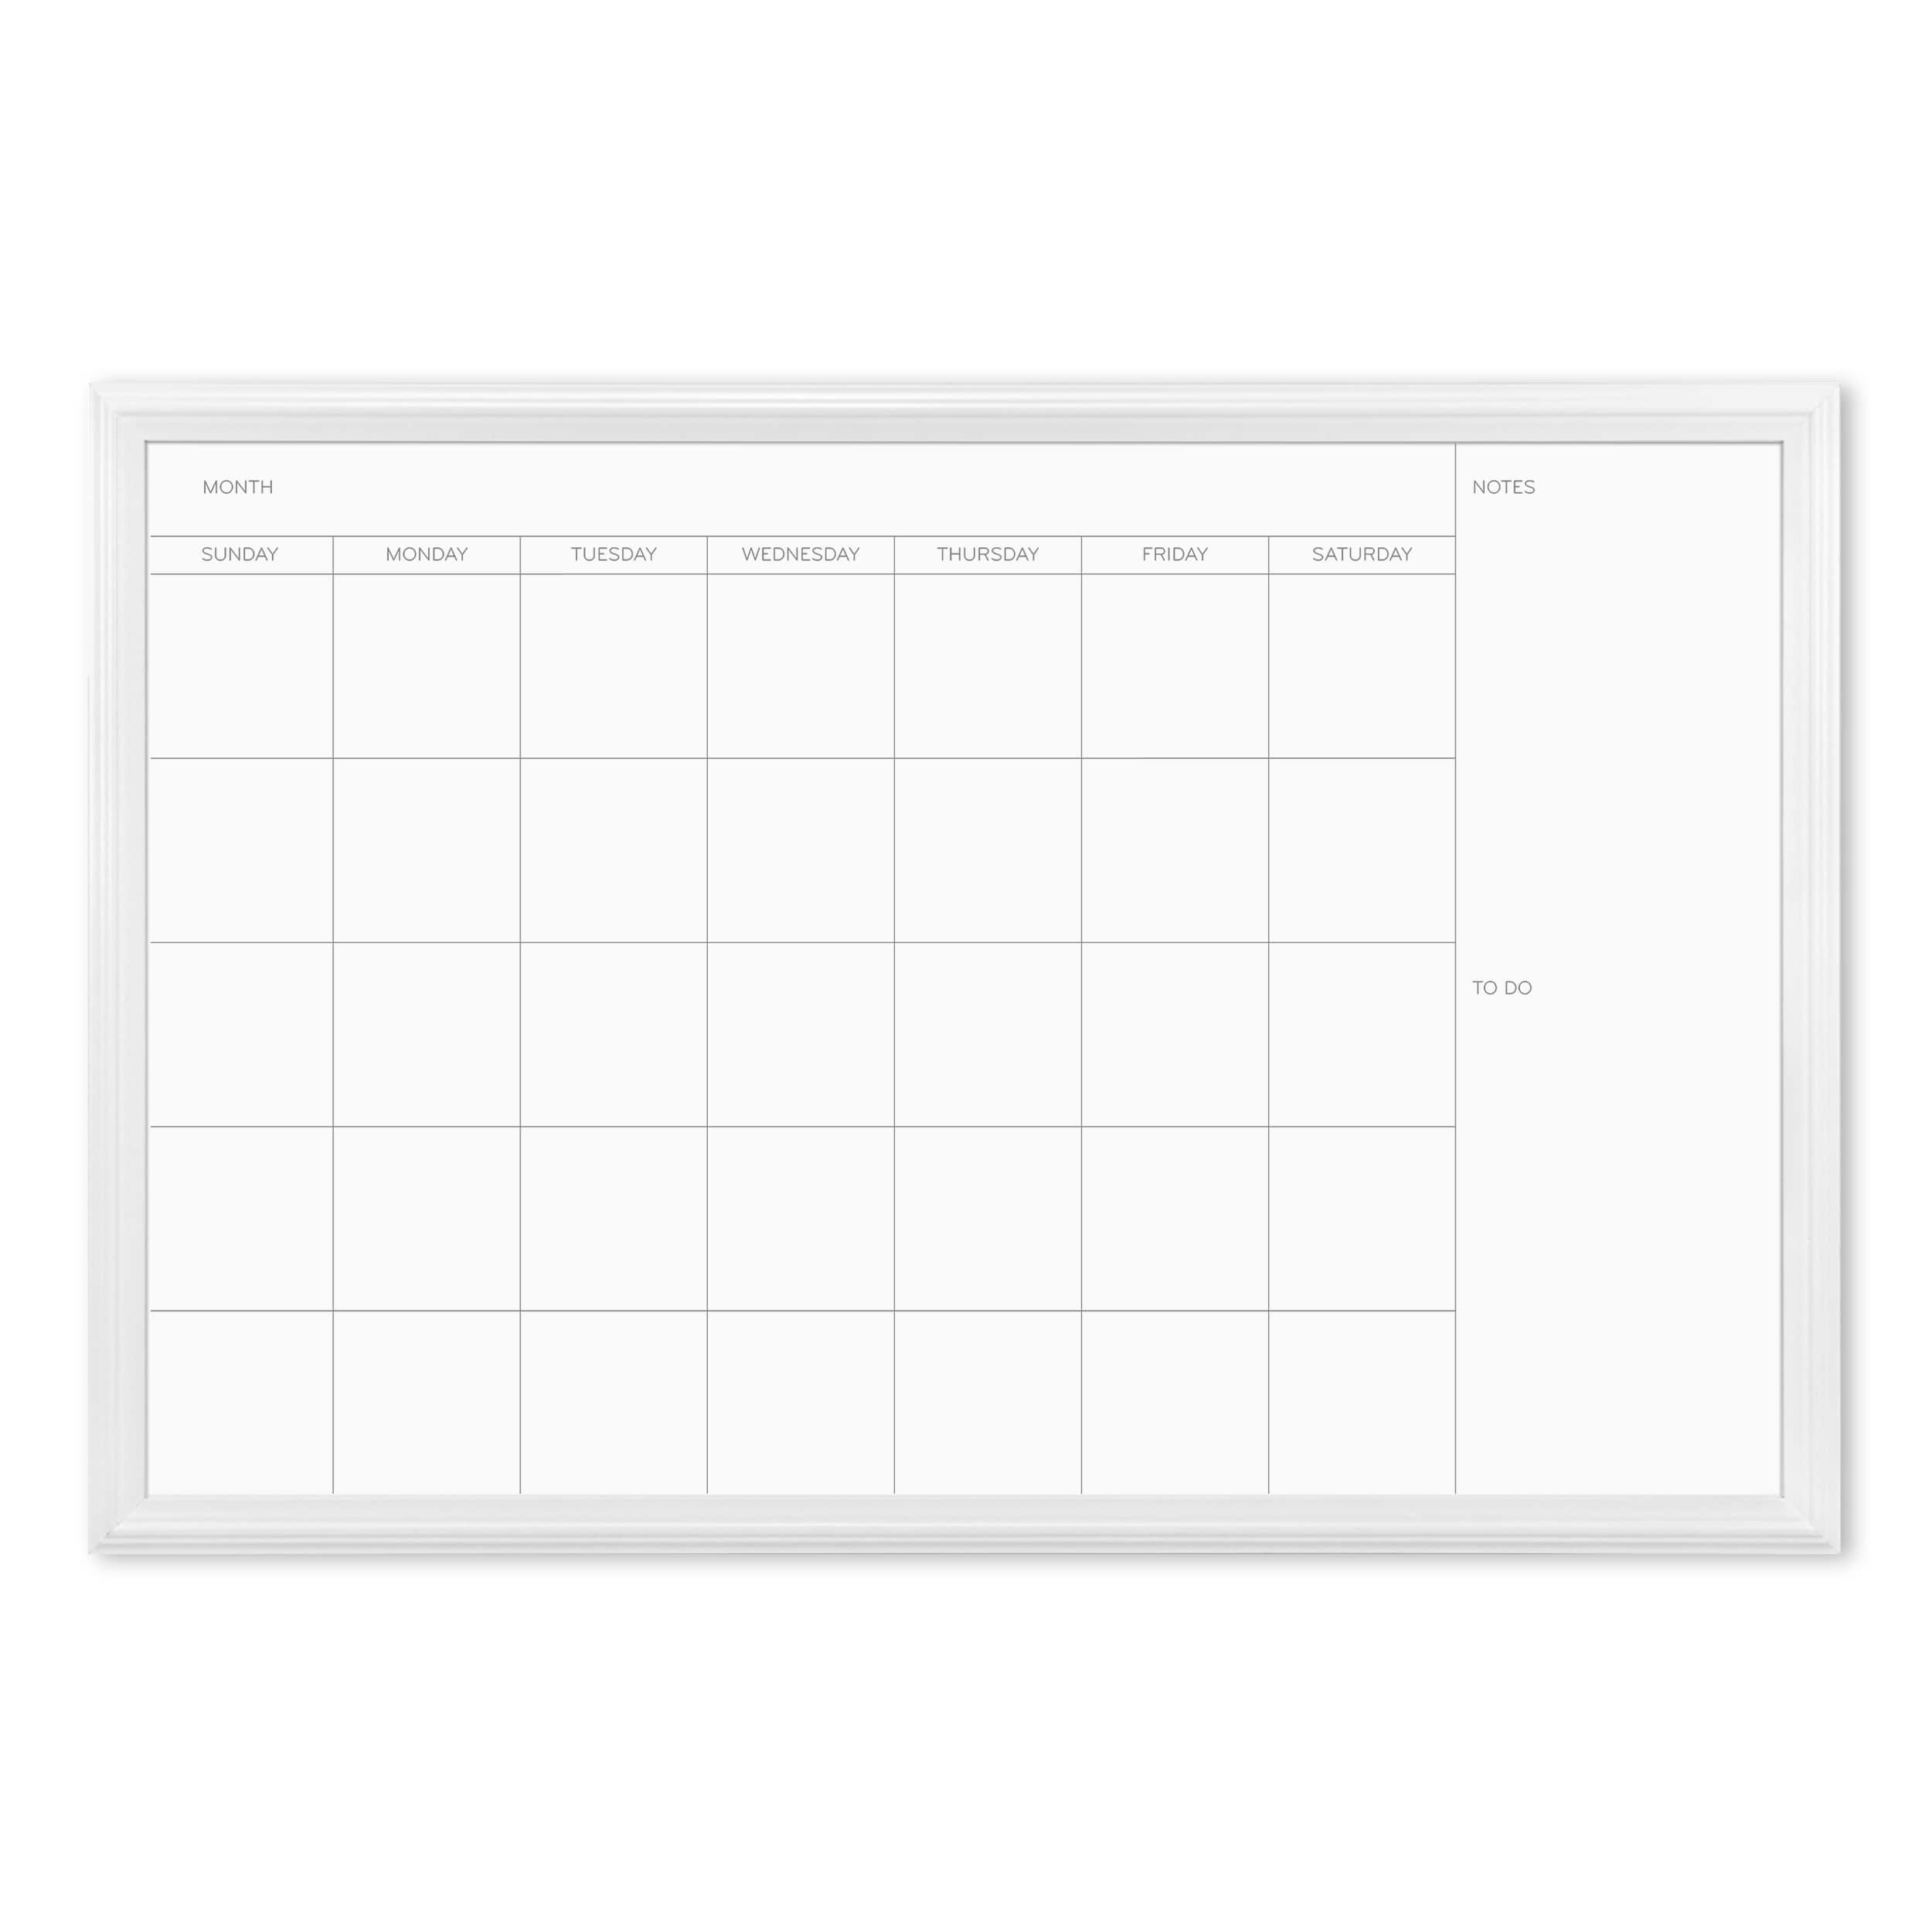 U Brands Magnetic Dry Erase Calendar with Decor Frame, 30 x 20, White Surface and Frame